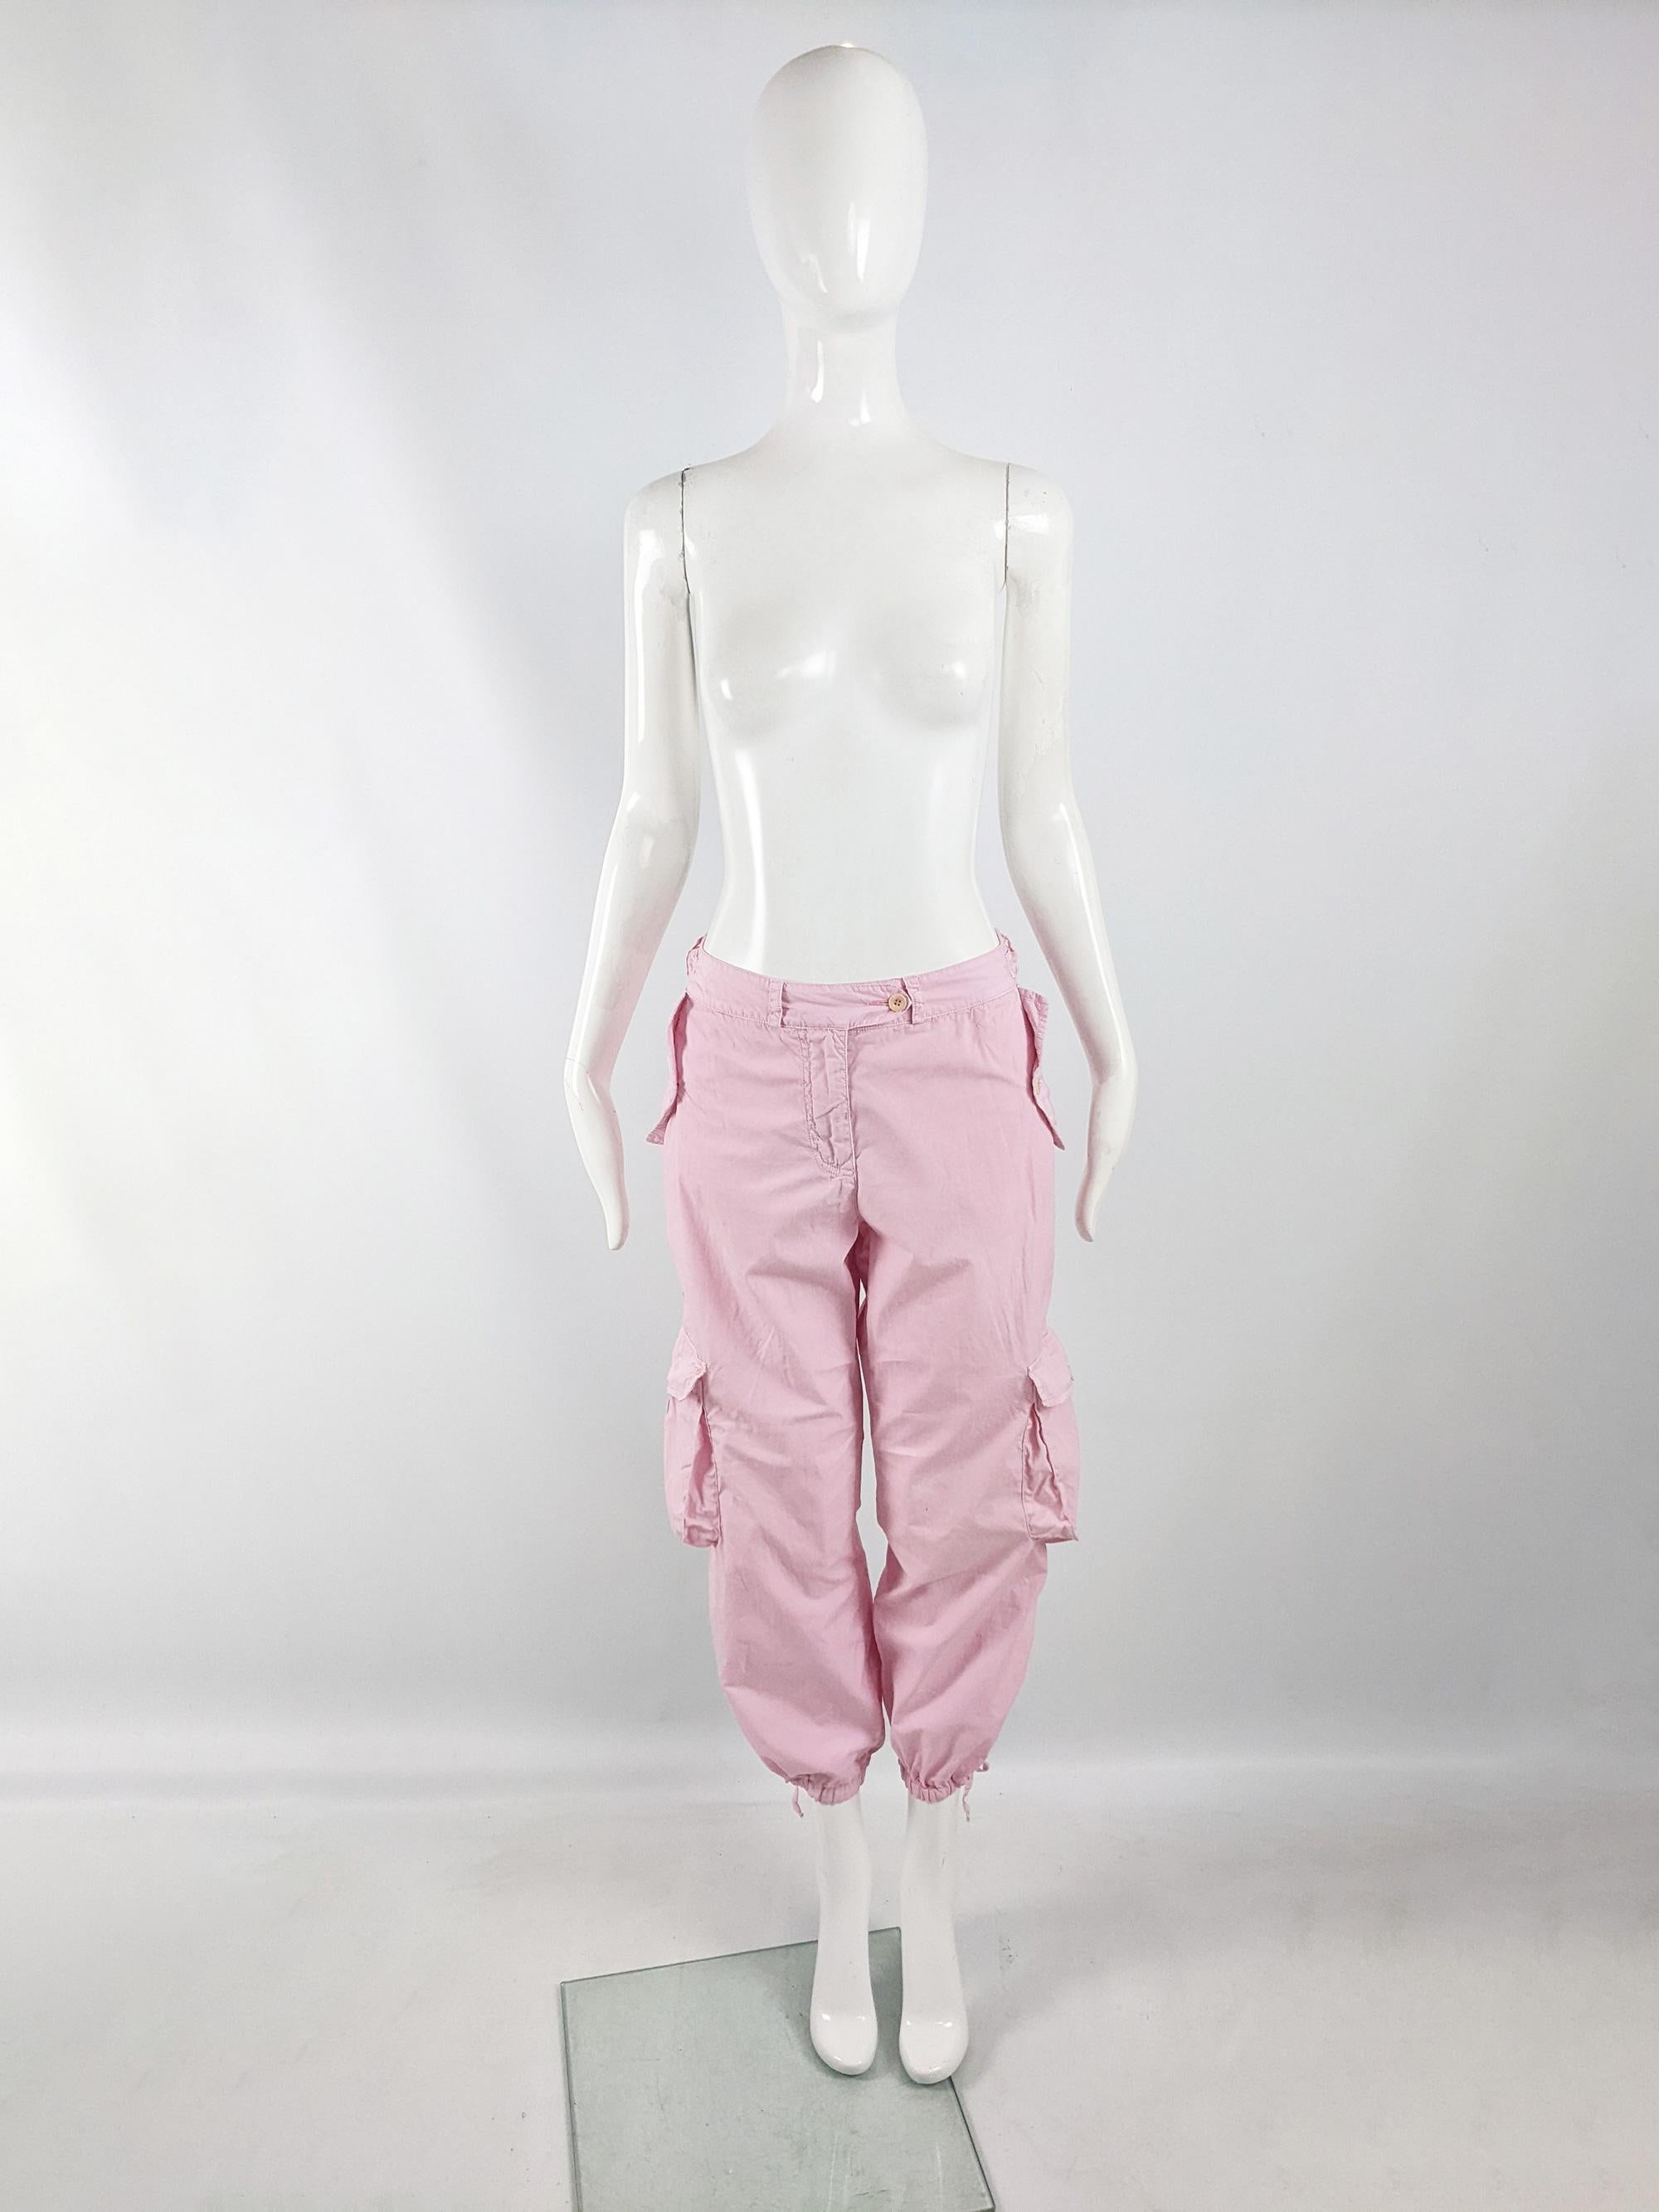 An incredible pair of vintage parachute pants from the early 2000s by luxury British fashion designer, Paul Smith. Made in Italy, from a pastel pink cotton with a baggy fit, cropped leg and large patch pockets. It has great detailing from the O